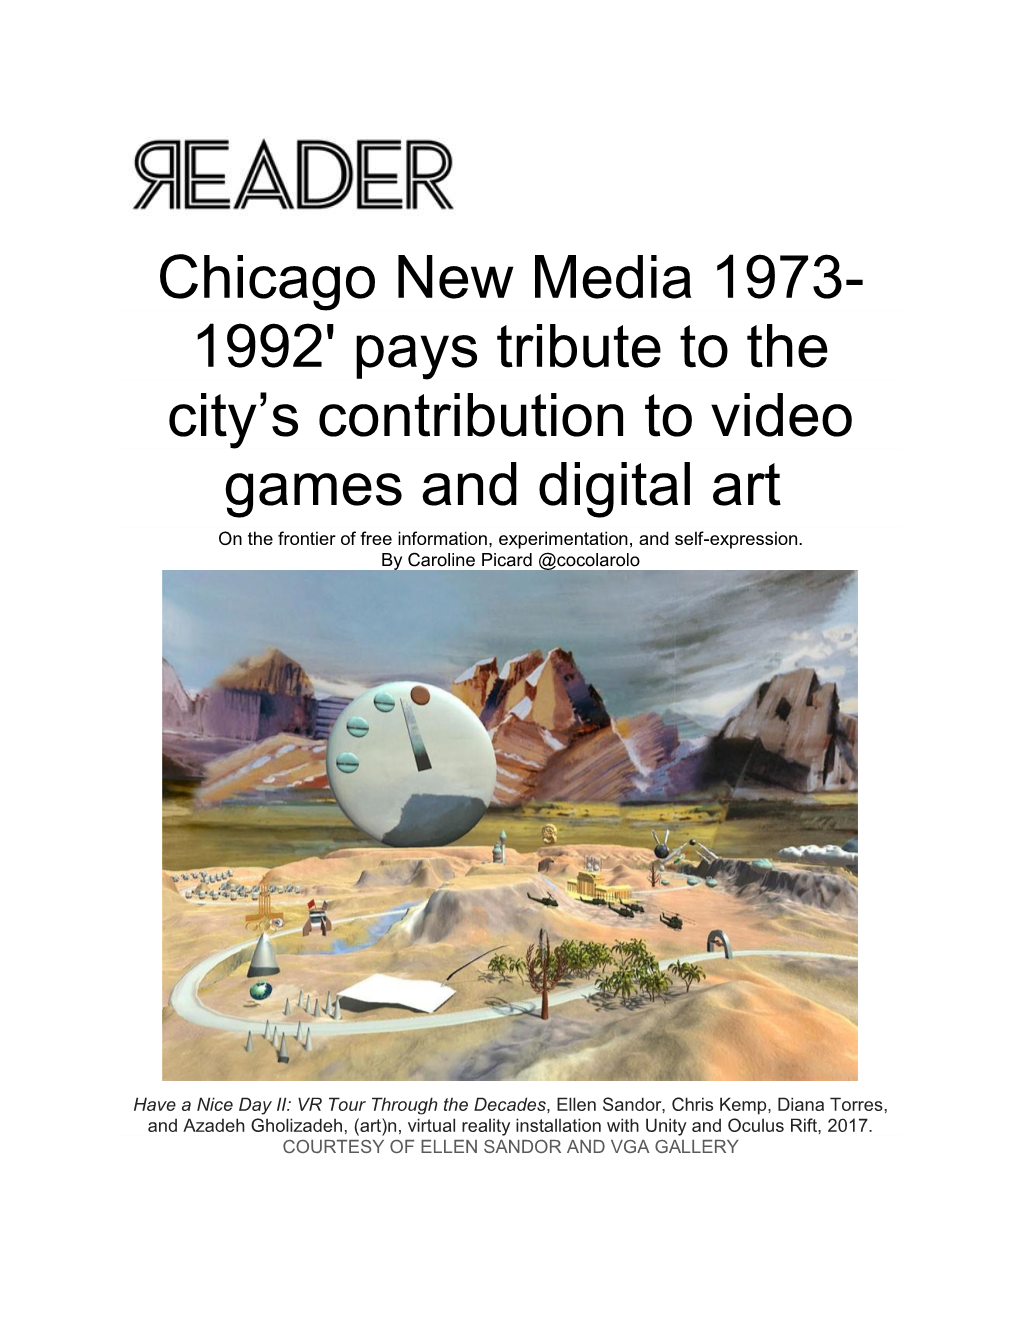 Chicago New Media 1973- 1992' Pays Tribute to the City's Contribution to Video Games and Digital